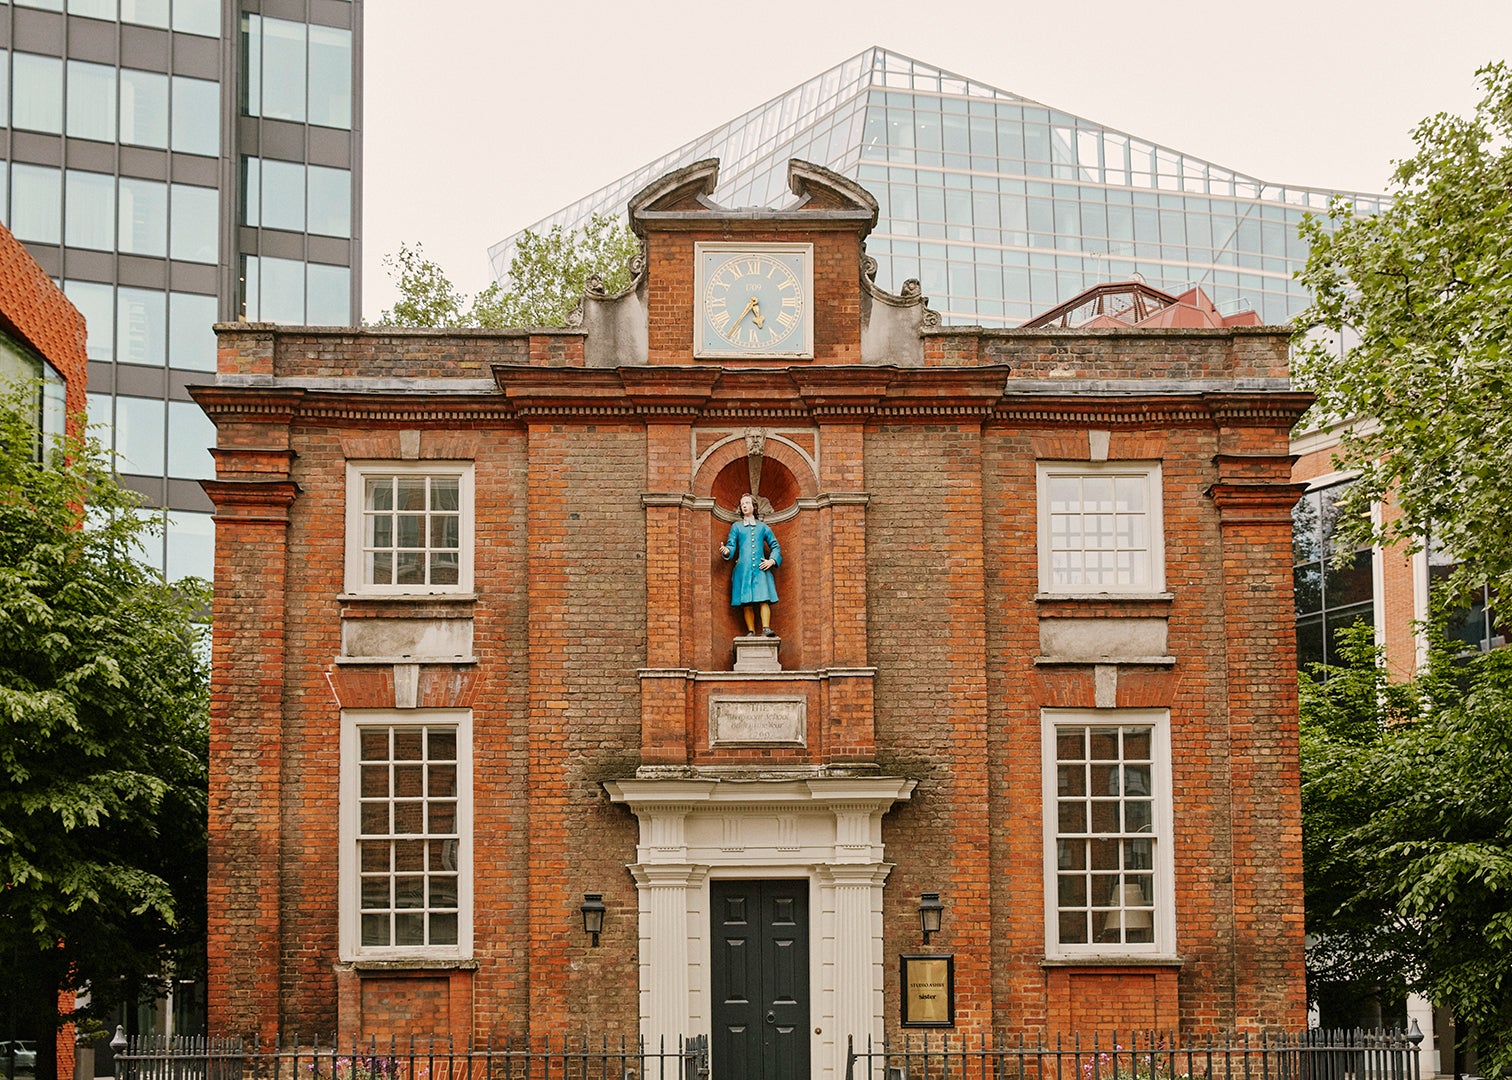 exterior of a 16th century schoolhouse in London